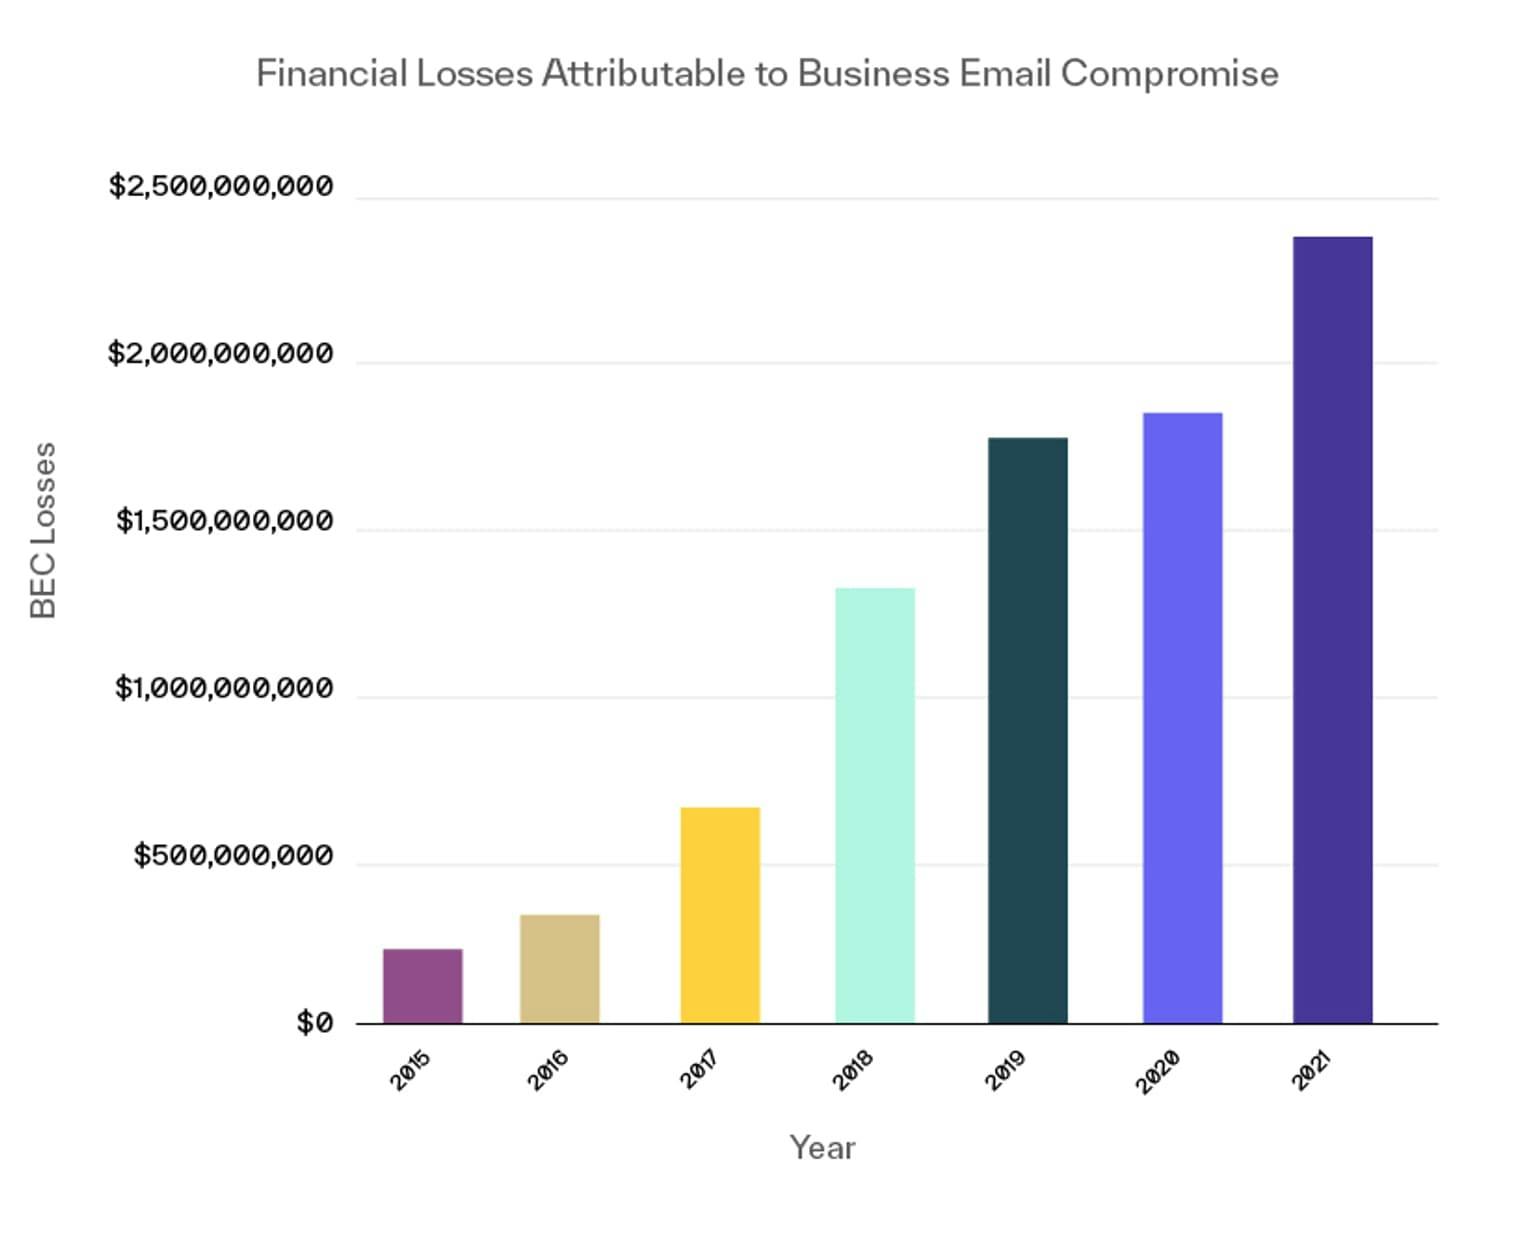 Yearly financial losses due to Business Email Compromise